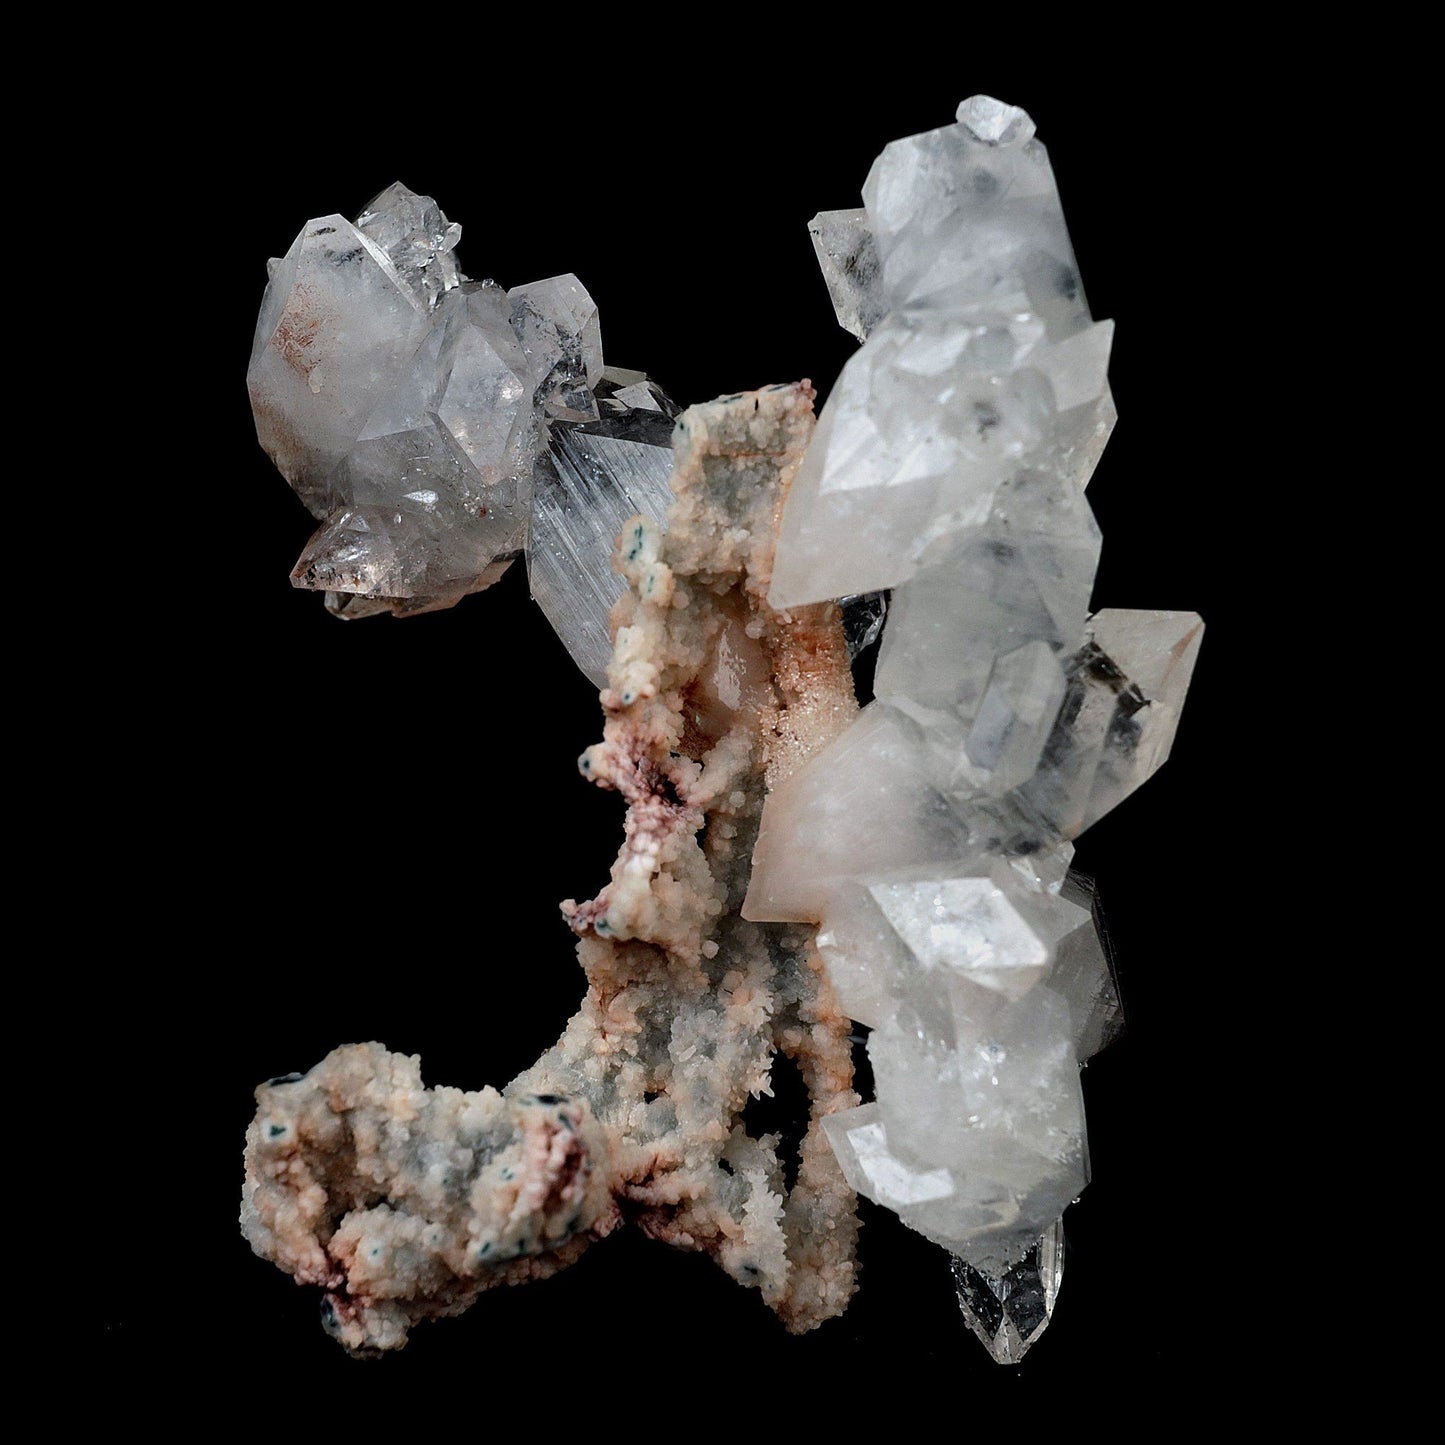 Pointed Apophyllite with Stilbite On Chalcedony Natural Mineral # B 4…  https://www.superbminerals.us/products/pointed-apophyllite-with-stilbite-on-chalcedony-natural-mineral-b-4178  Features:Very fine classic Apophyllite specimen with Stilbite on Quartz from the Jalgaon area Deccan Trap flood Basalts. Sharply formed crystals of Apophyllite, displaying strong development of prism and pyramidal faces. Crystals of Apophyllite have pleasing color less gemmy pyramidal areas due to hematite inclusions